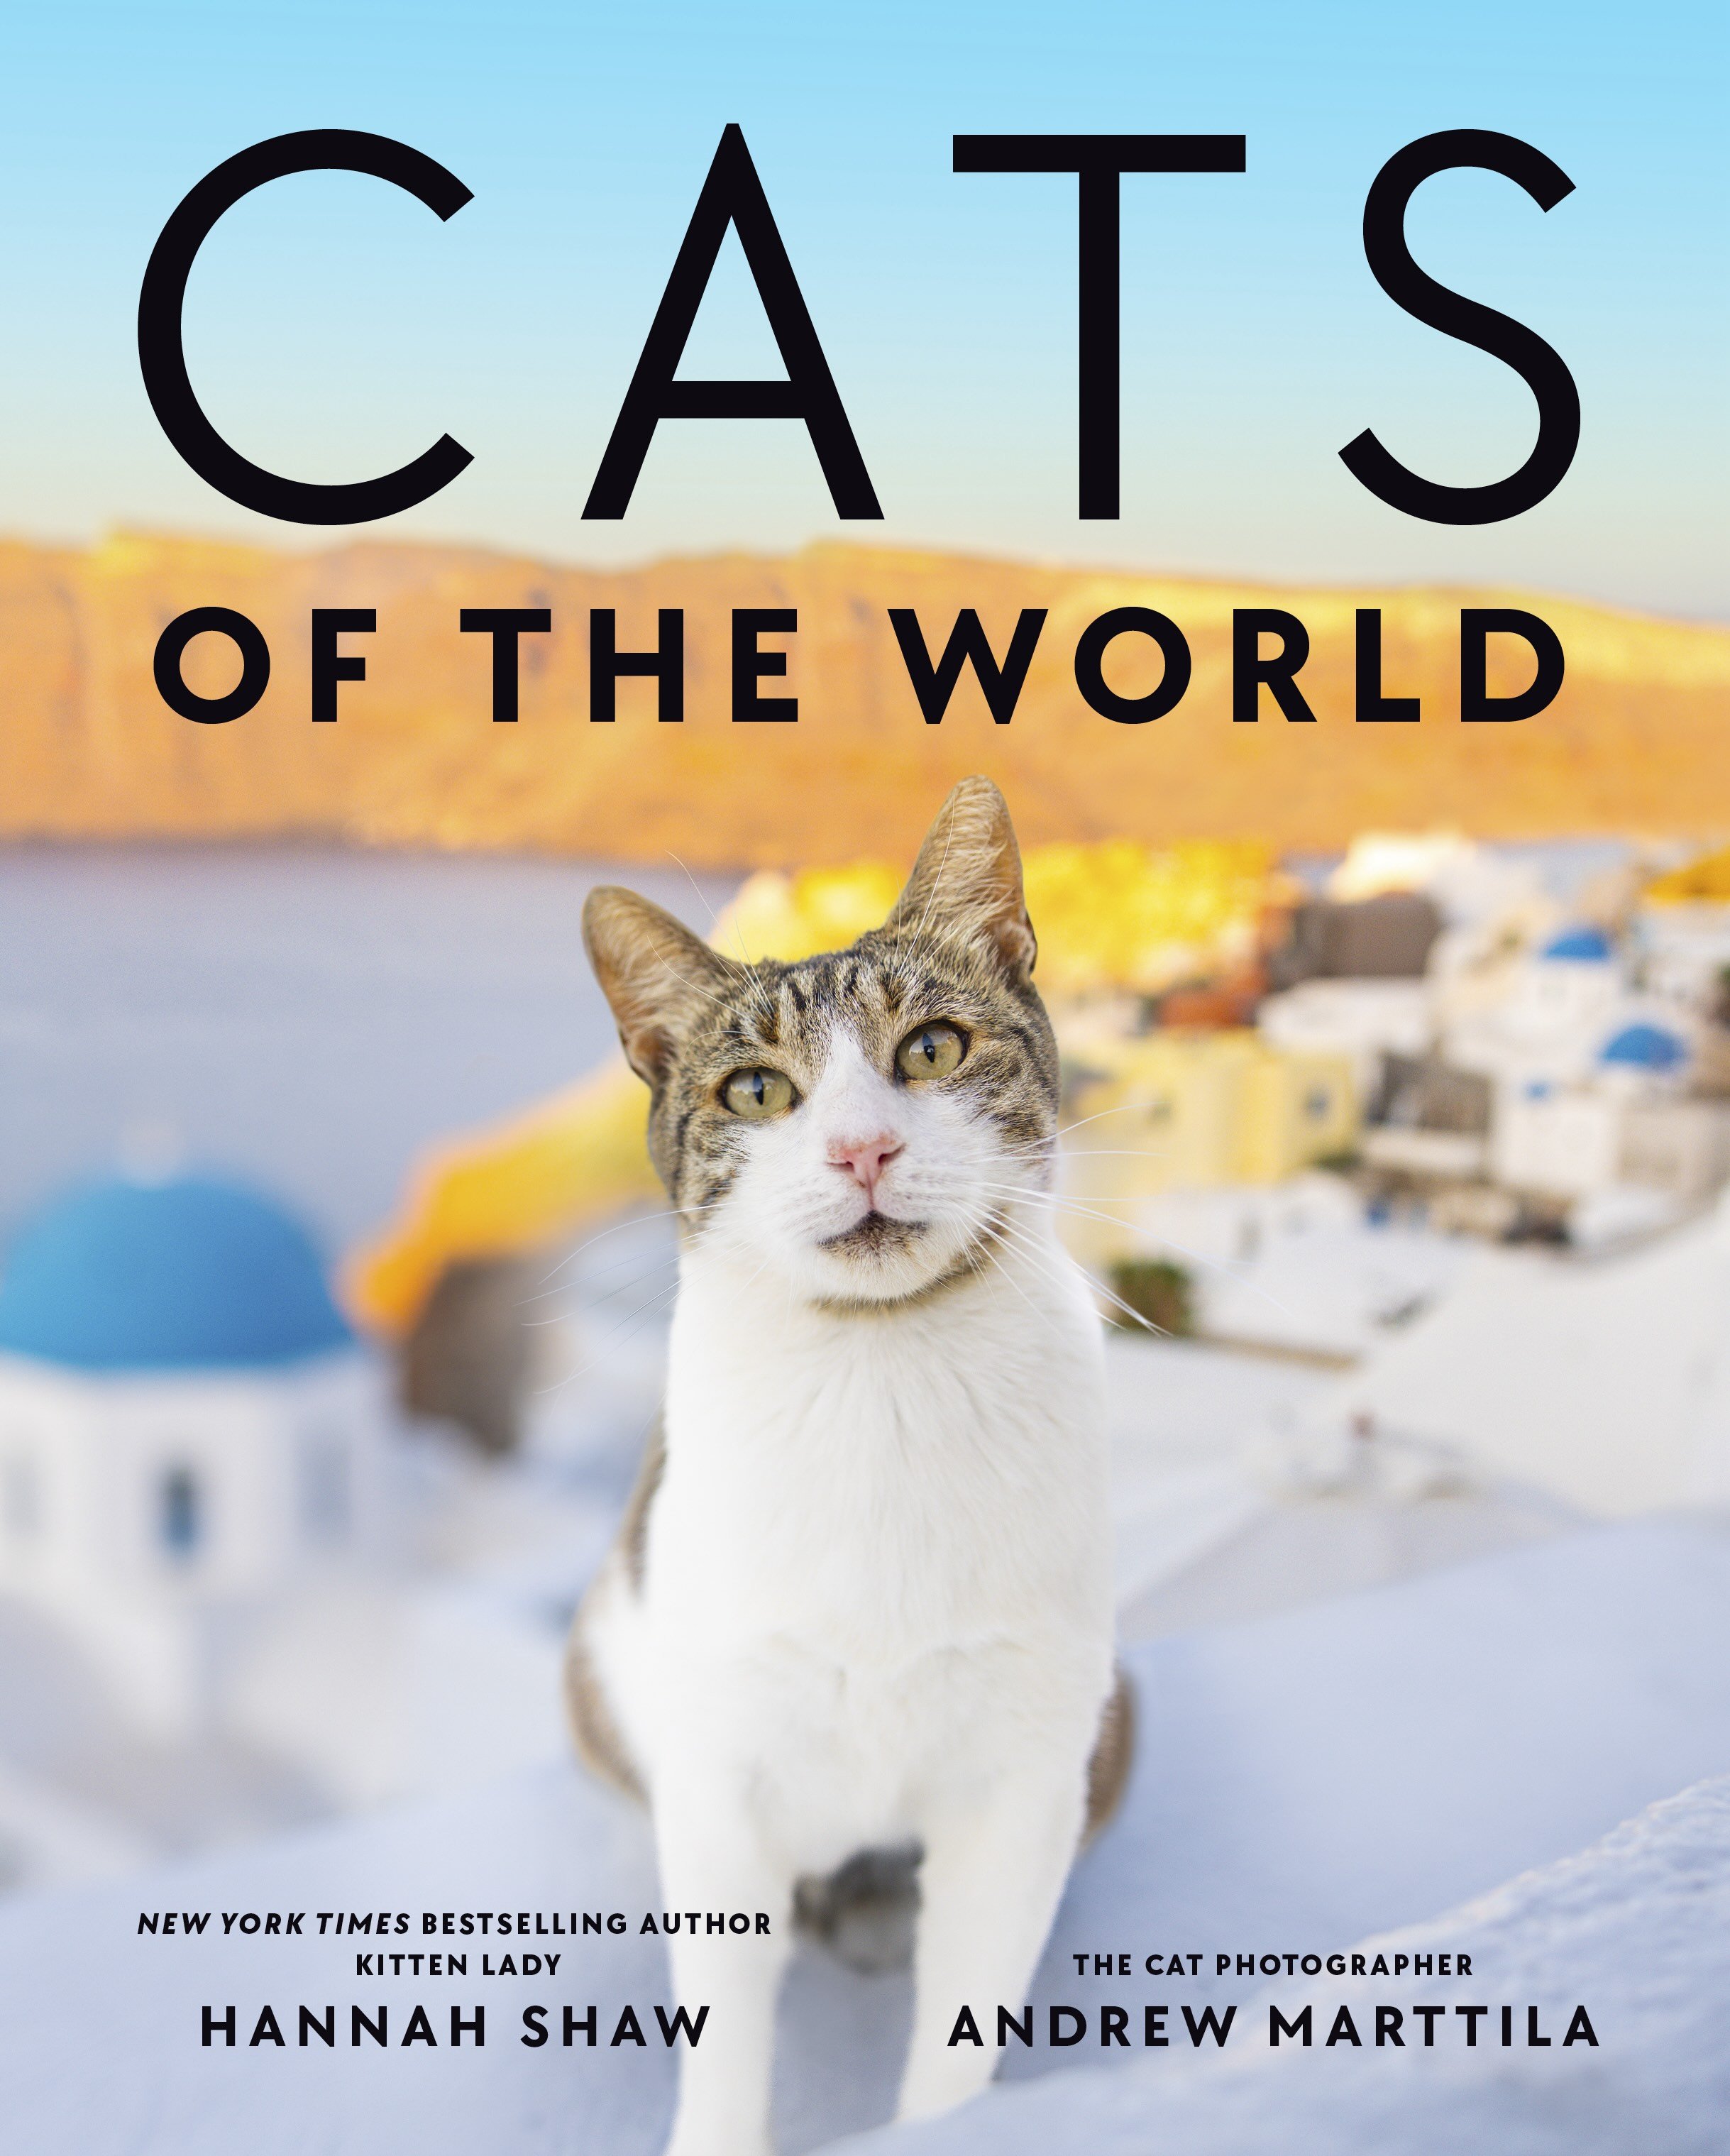 Hannah “Kitten Lady” Shaw and cat photographer Andrew Marttila journeyed to thirty countries to create this powerful collection of photos and stories of cats from every corner of the world.